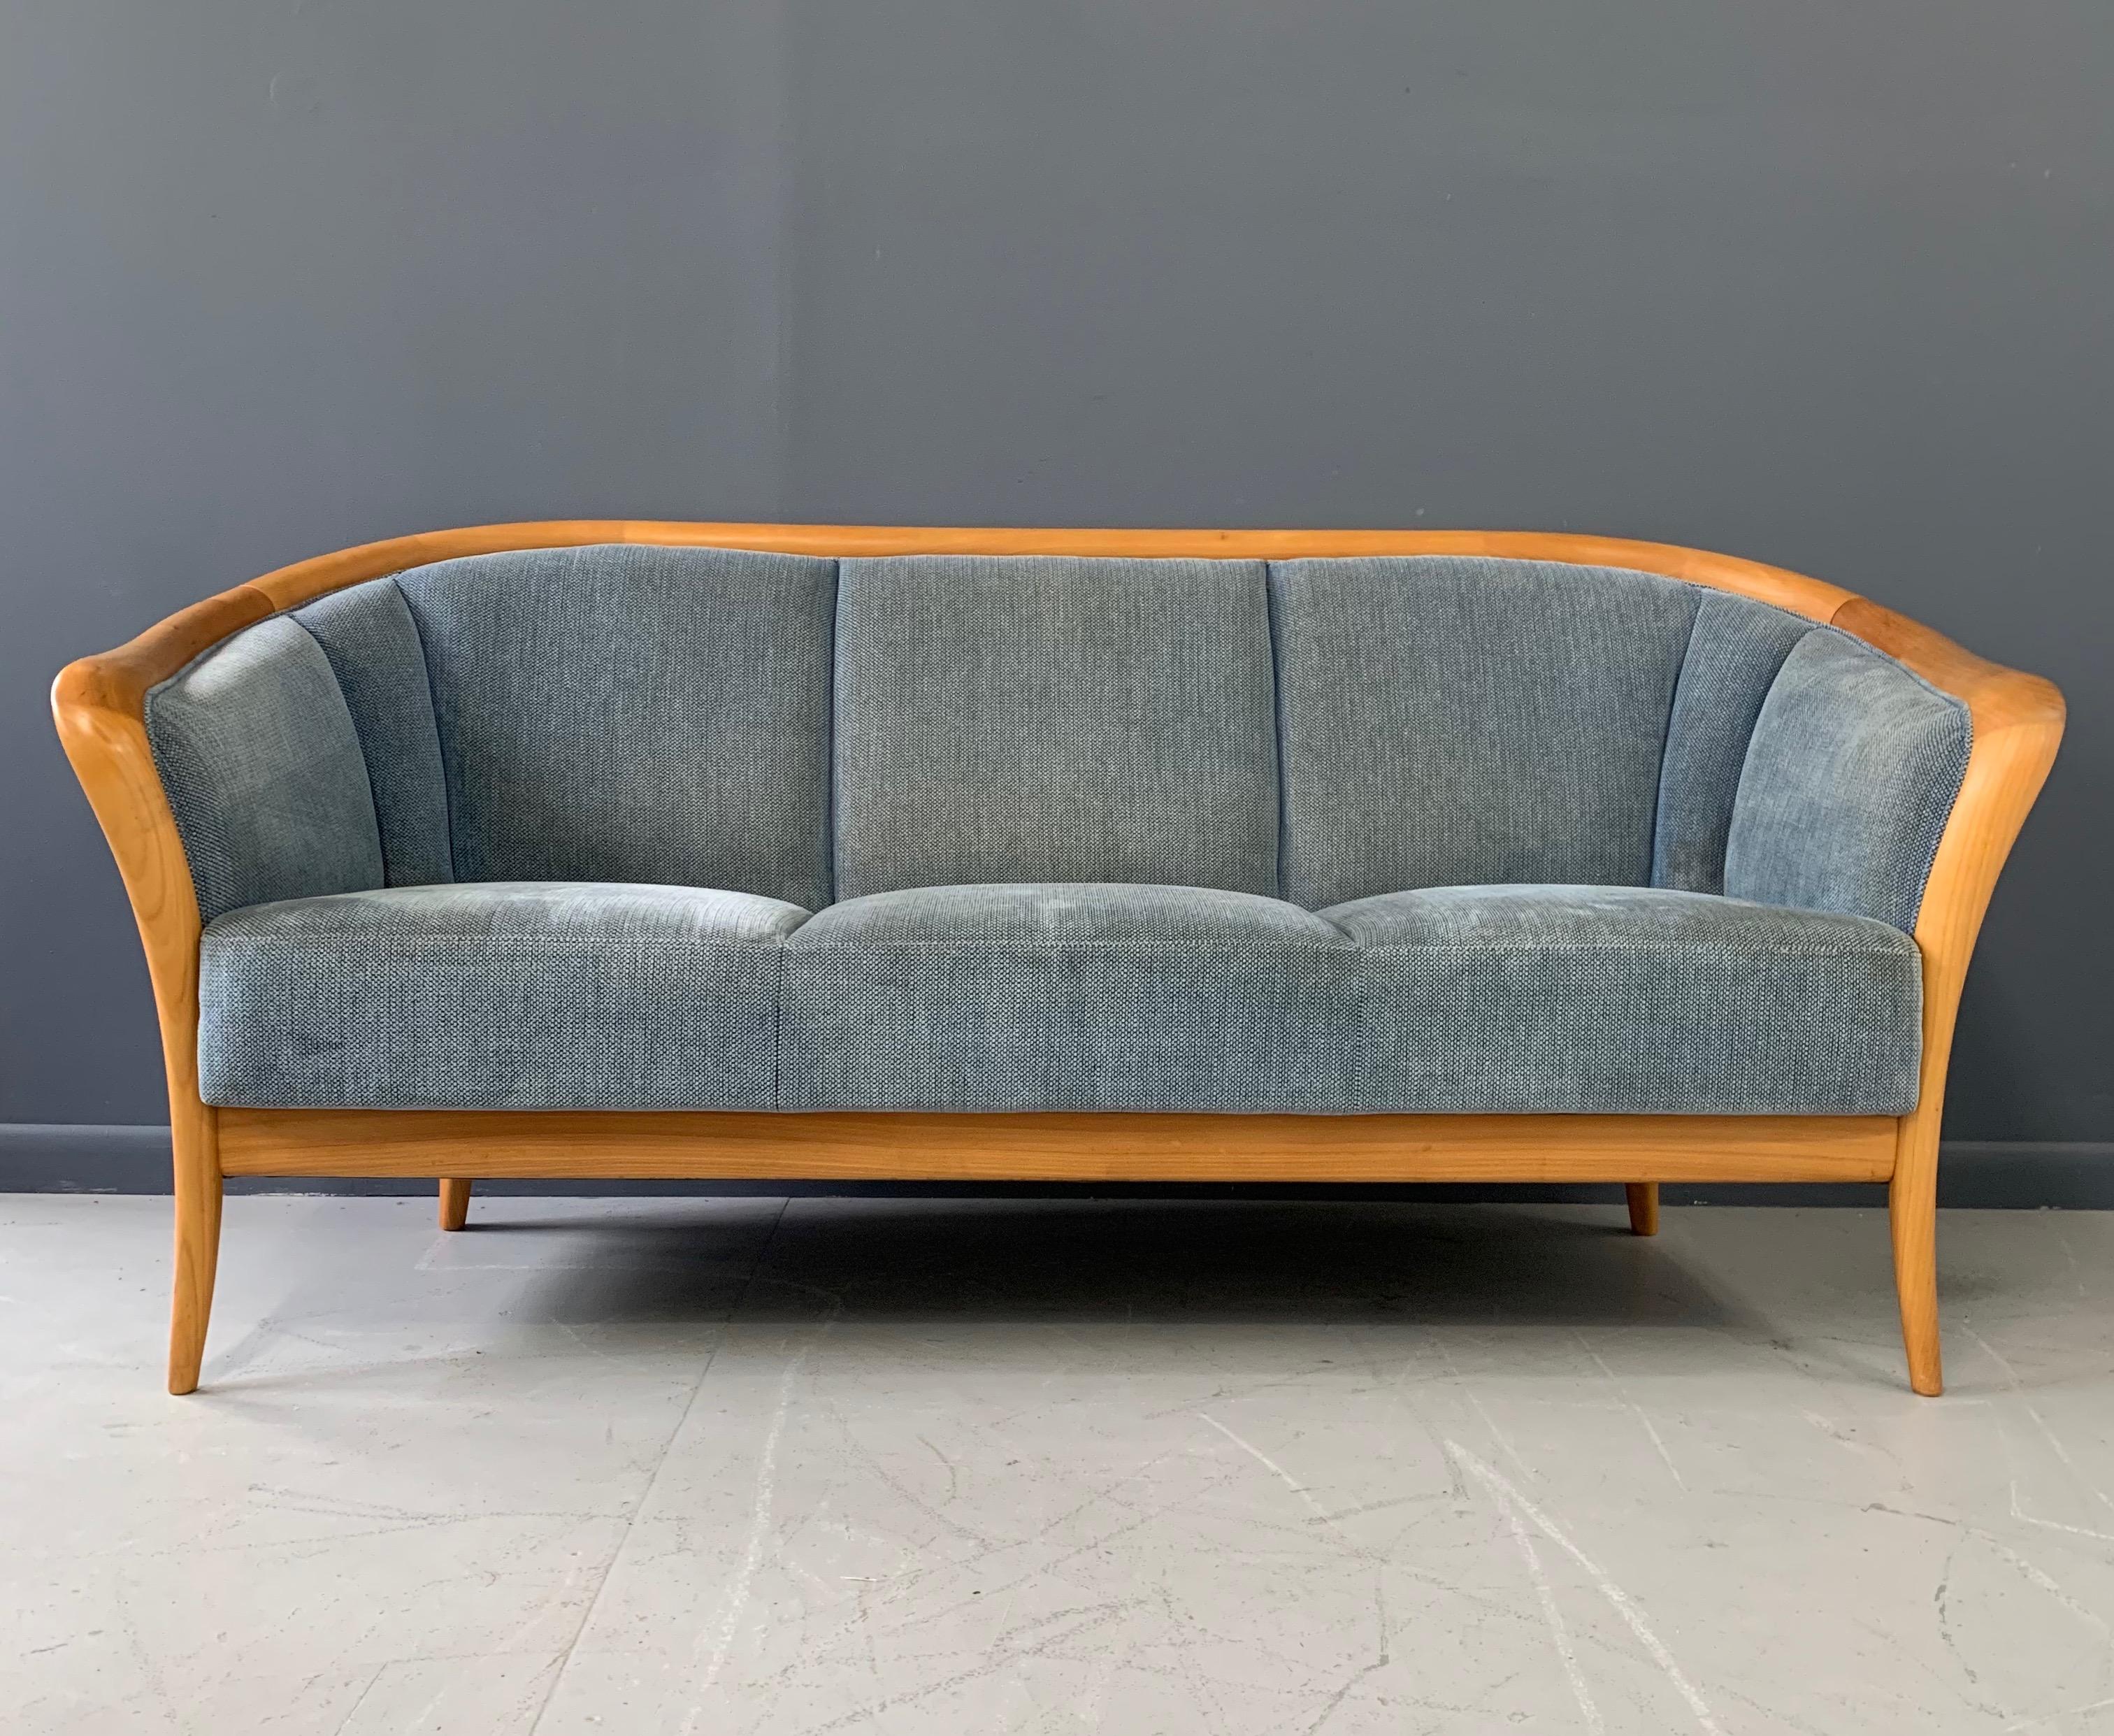 Petite sofa in birch with extraordinary joining and wonderfully curved arms would be a wonderful addition to your apartment style living. 

The fabric on this sofa could use replacement, we would be happy to reupholster this sofa with your fabric